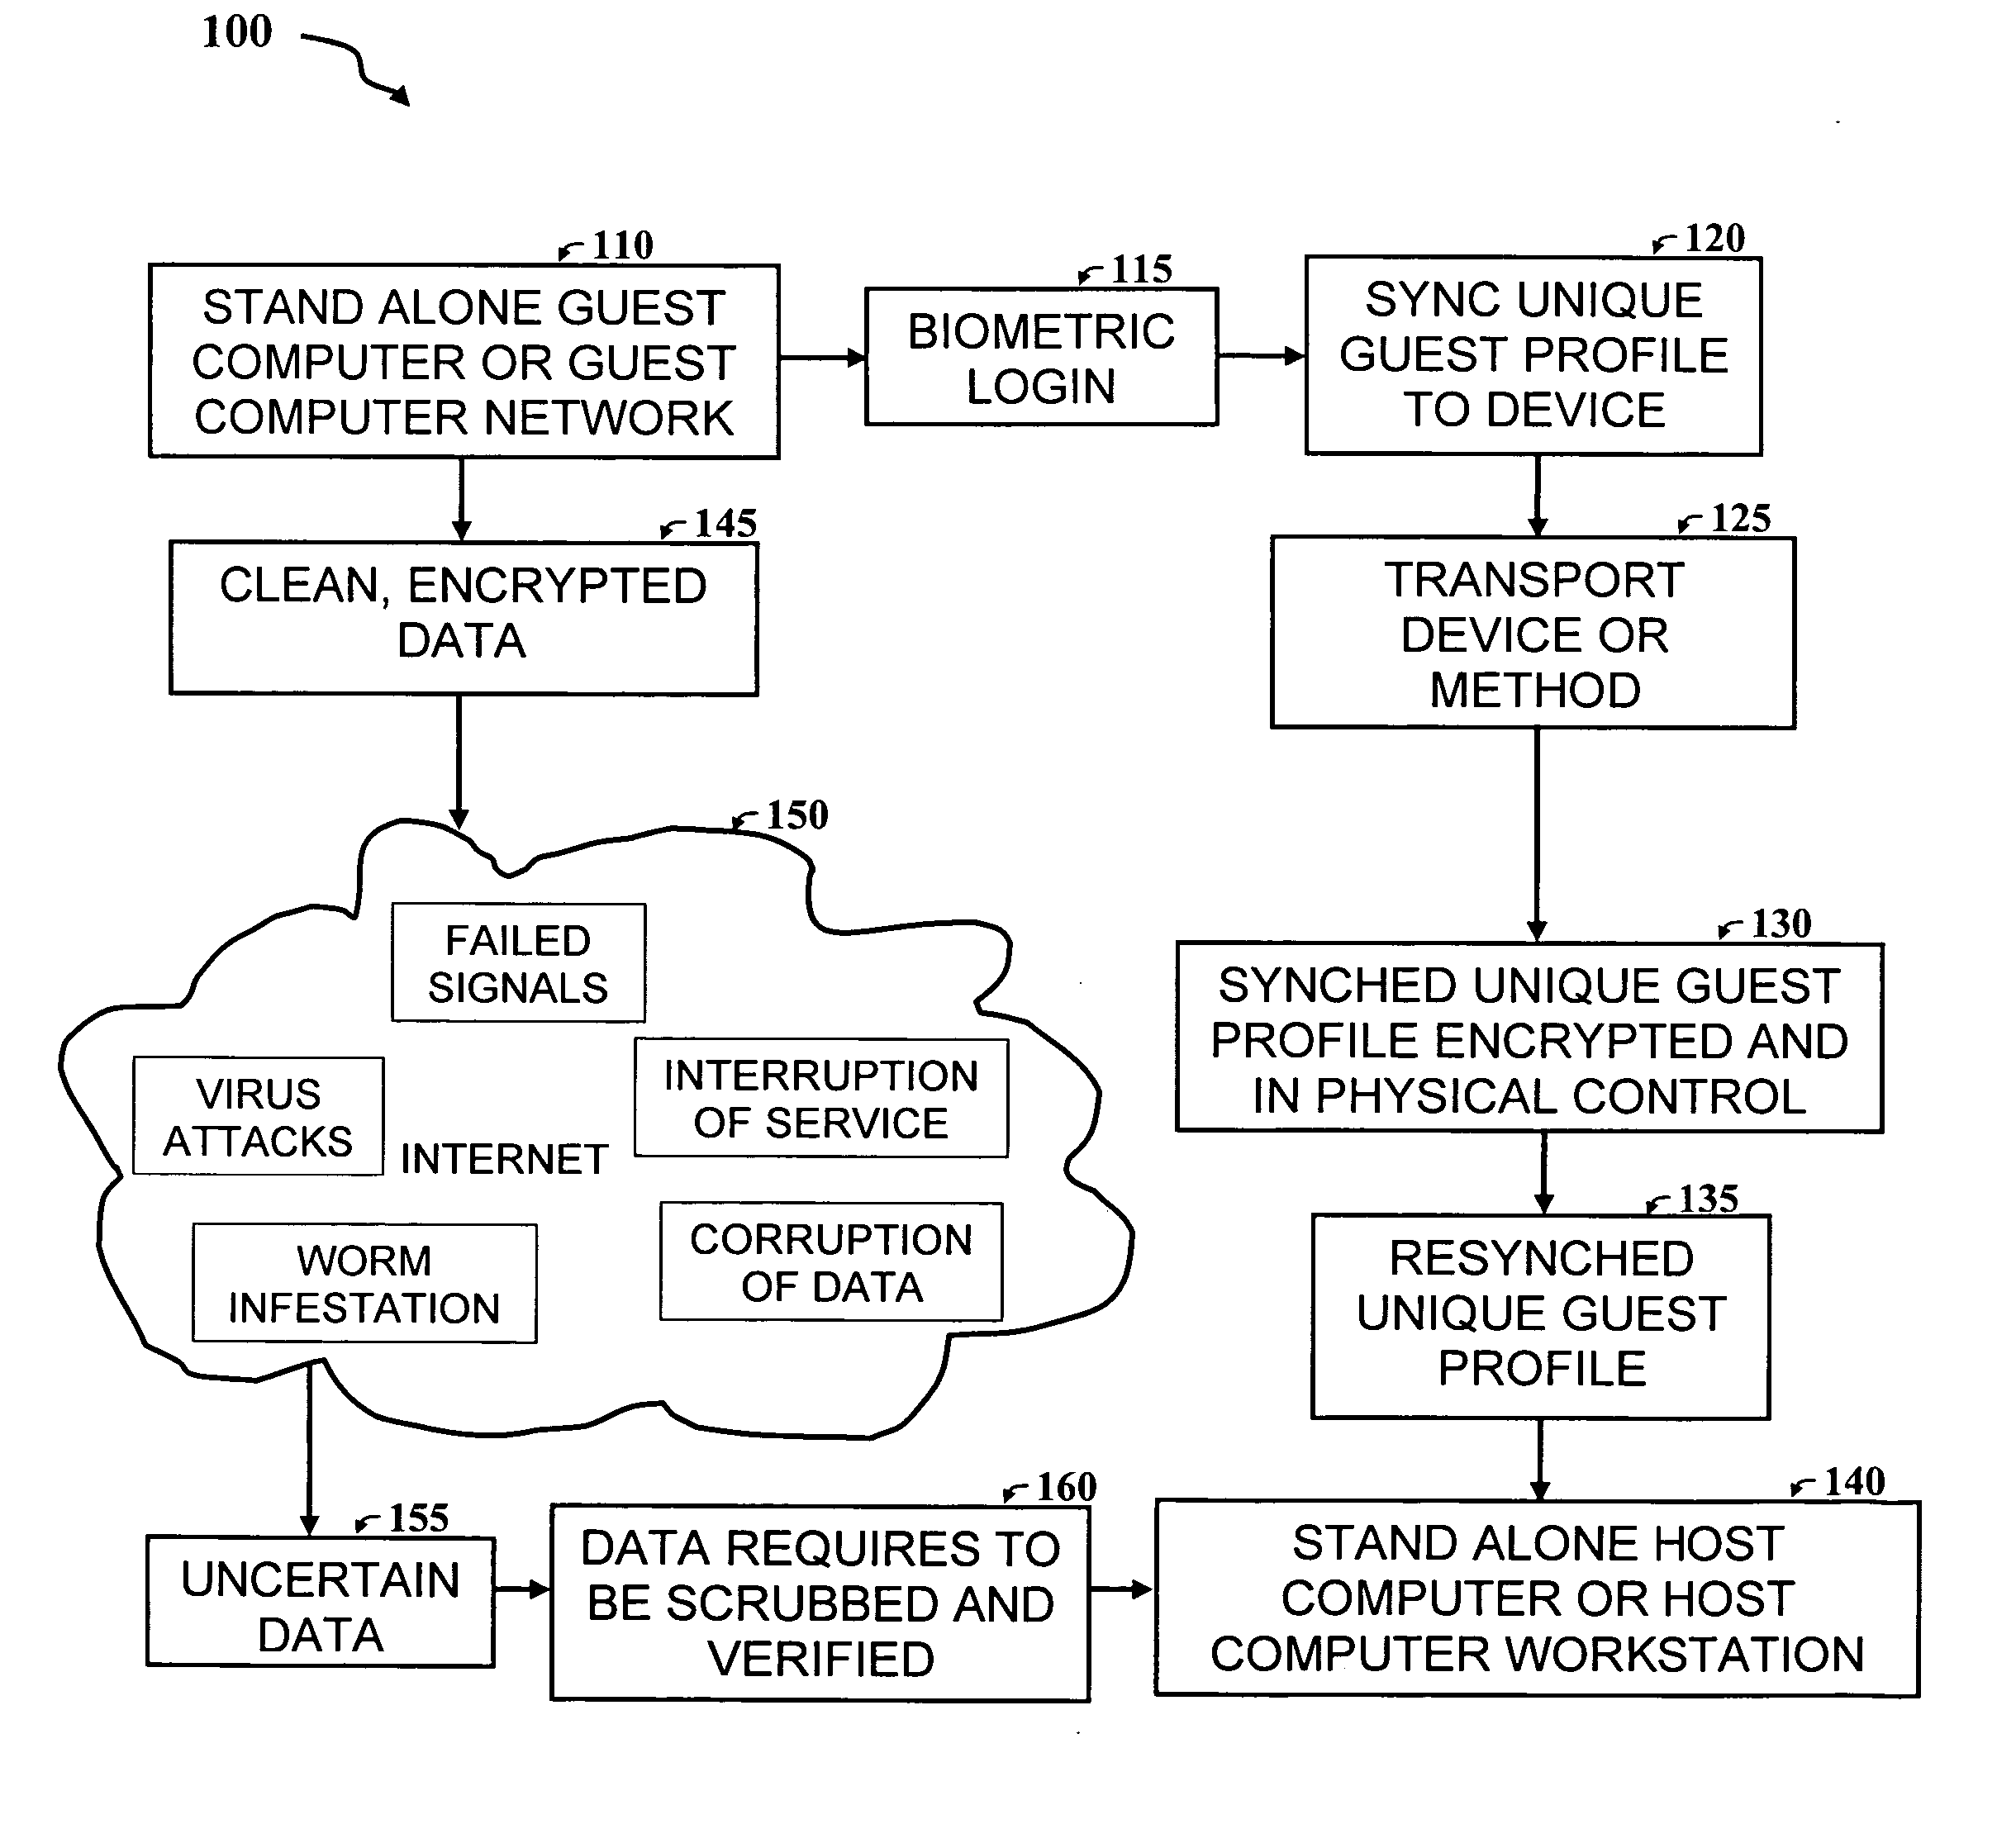 Method for authenticating a user profile for providing user access to restricted information based upon biometric confirmation